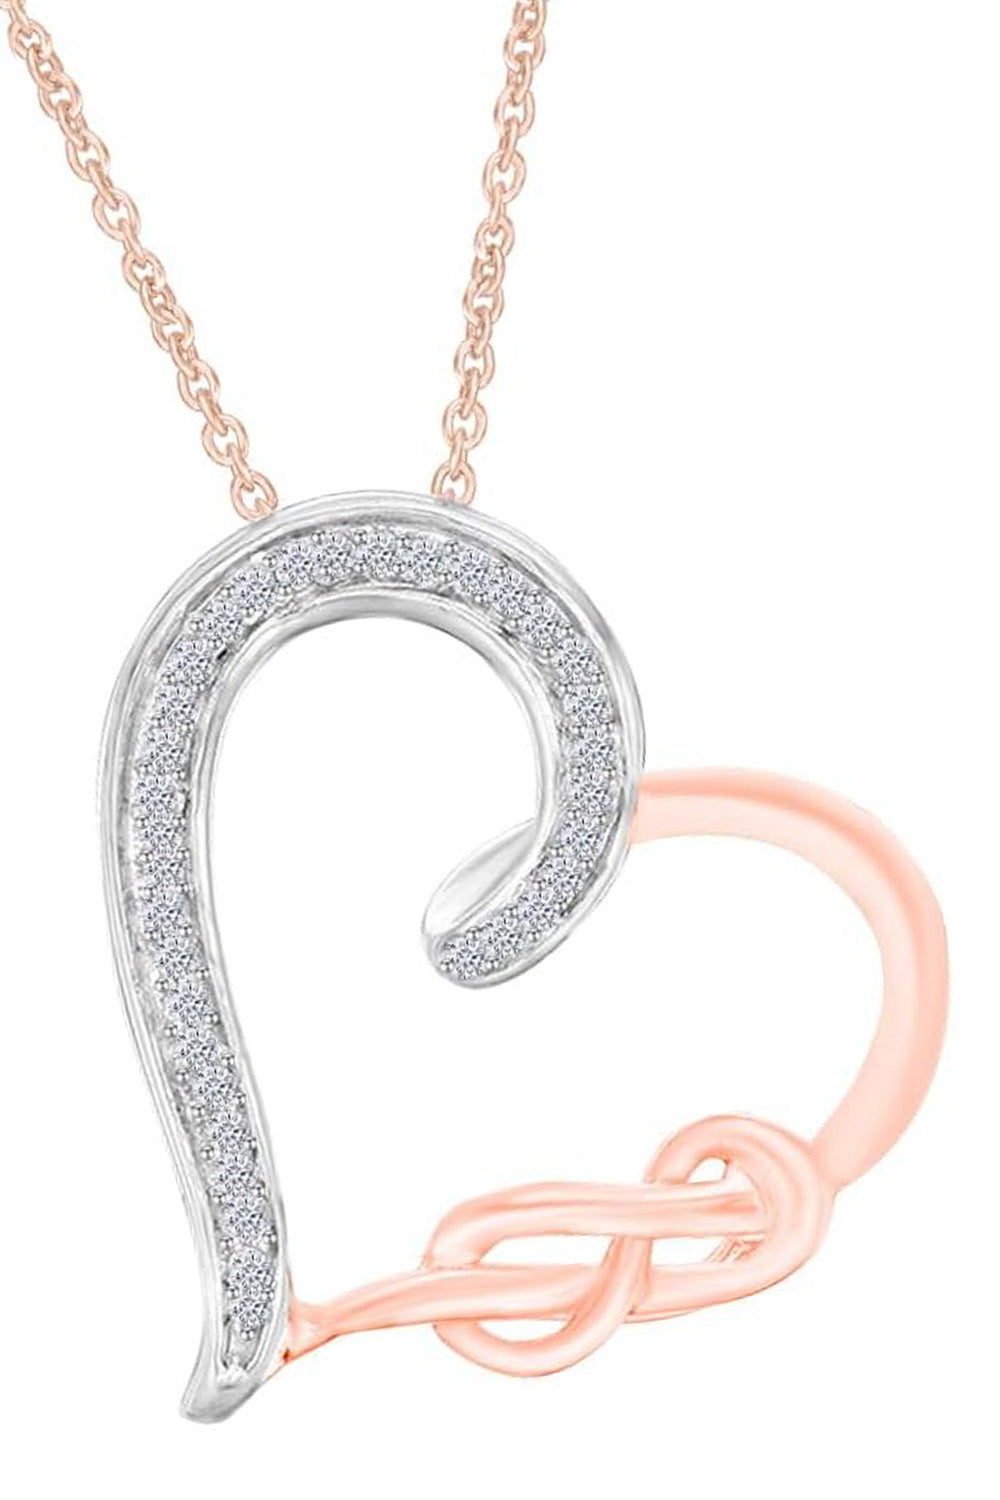  Rose Gold Color Infinity Knot Heart Pendant Necklace